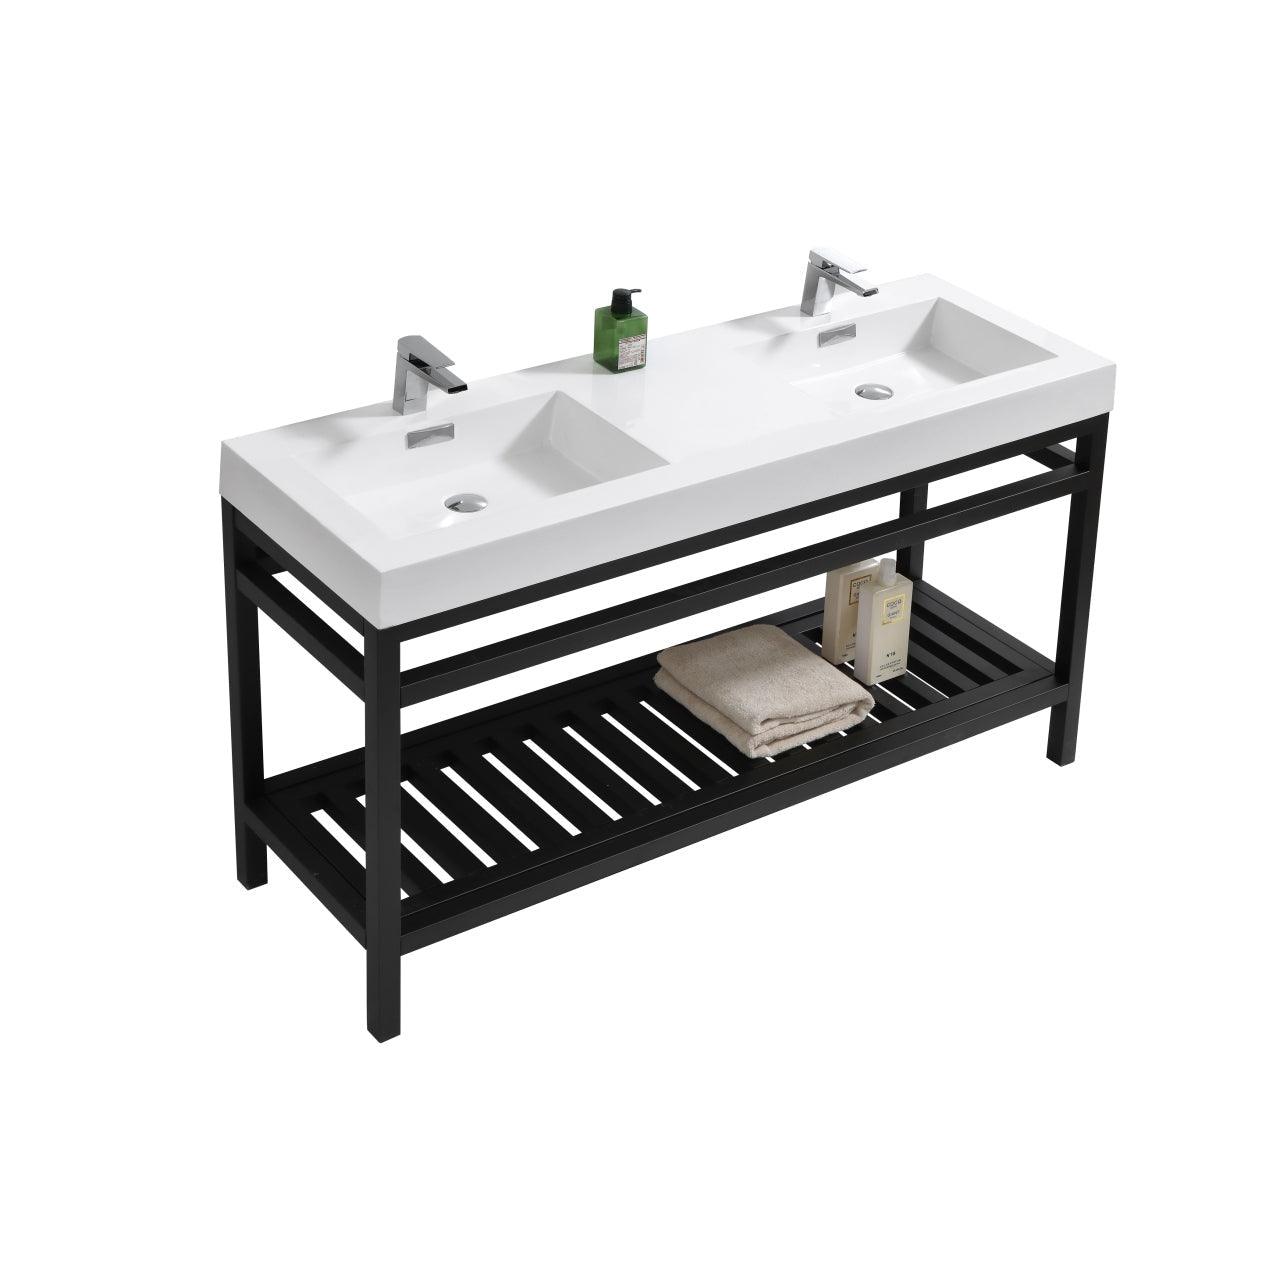 Cisco 60" Double Sink Stainless Steel Console with Acrylic Sink - Home and Bath Depot